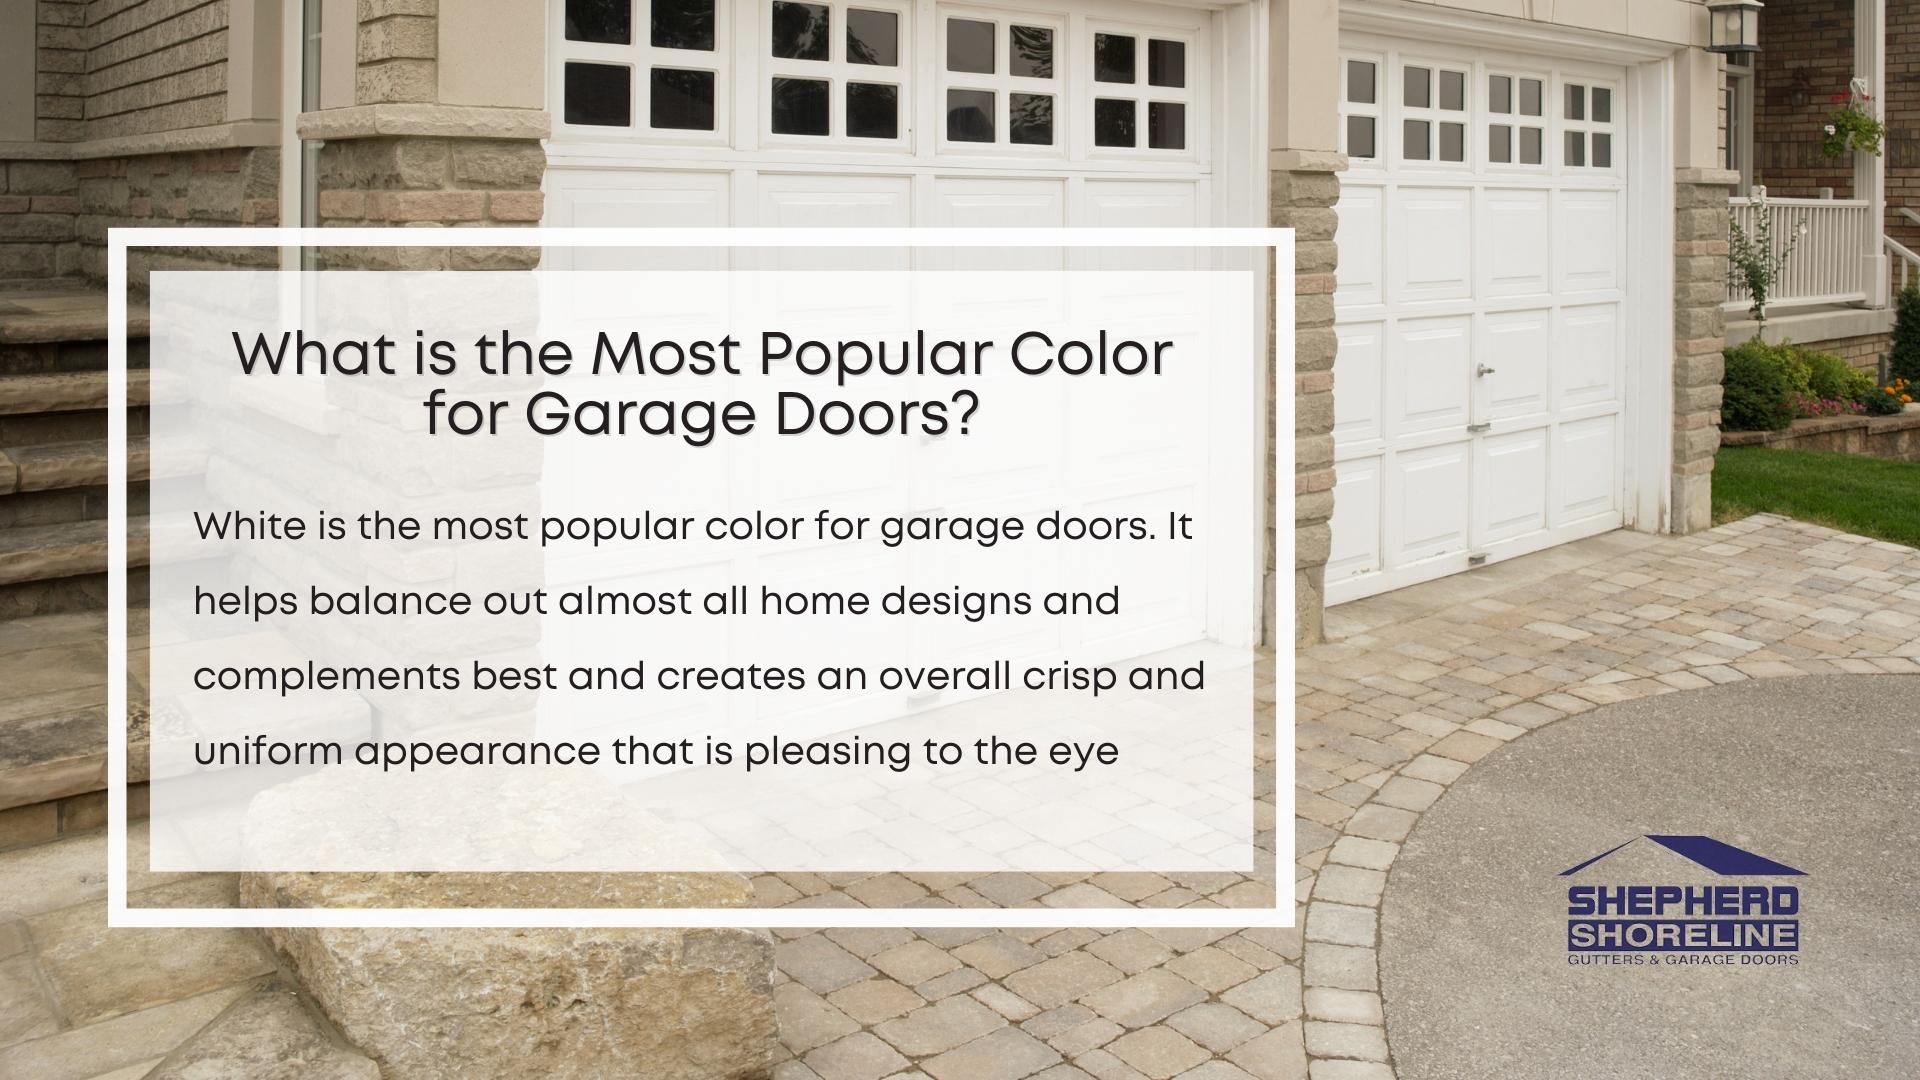 Infographic of the most popular color for garage doors